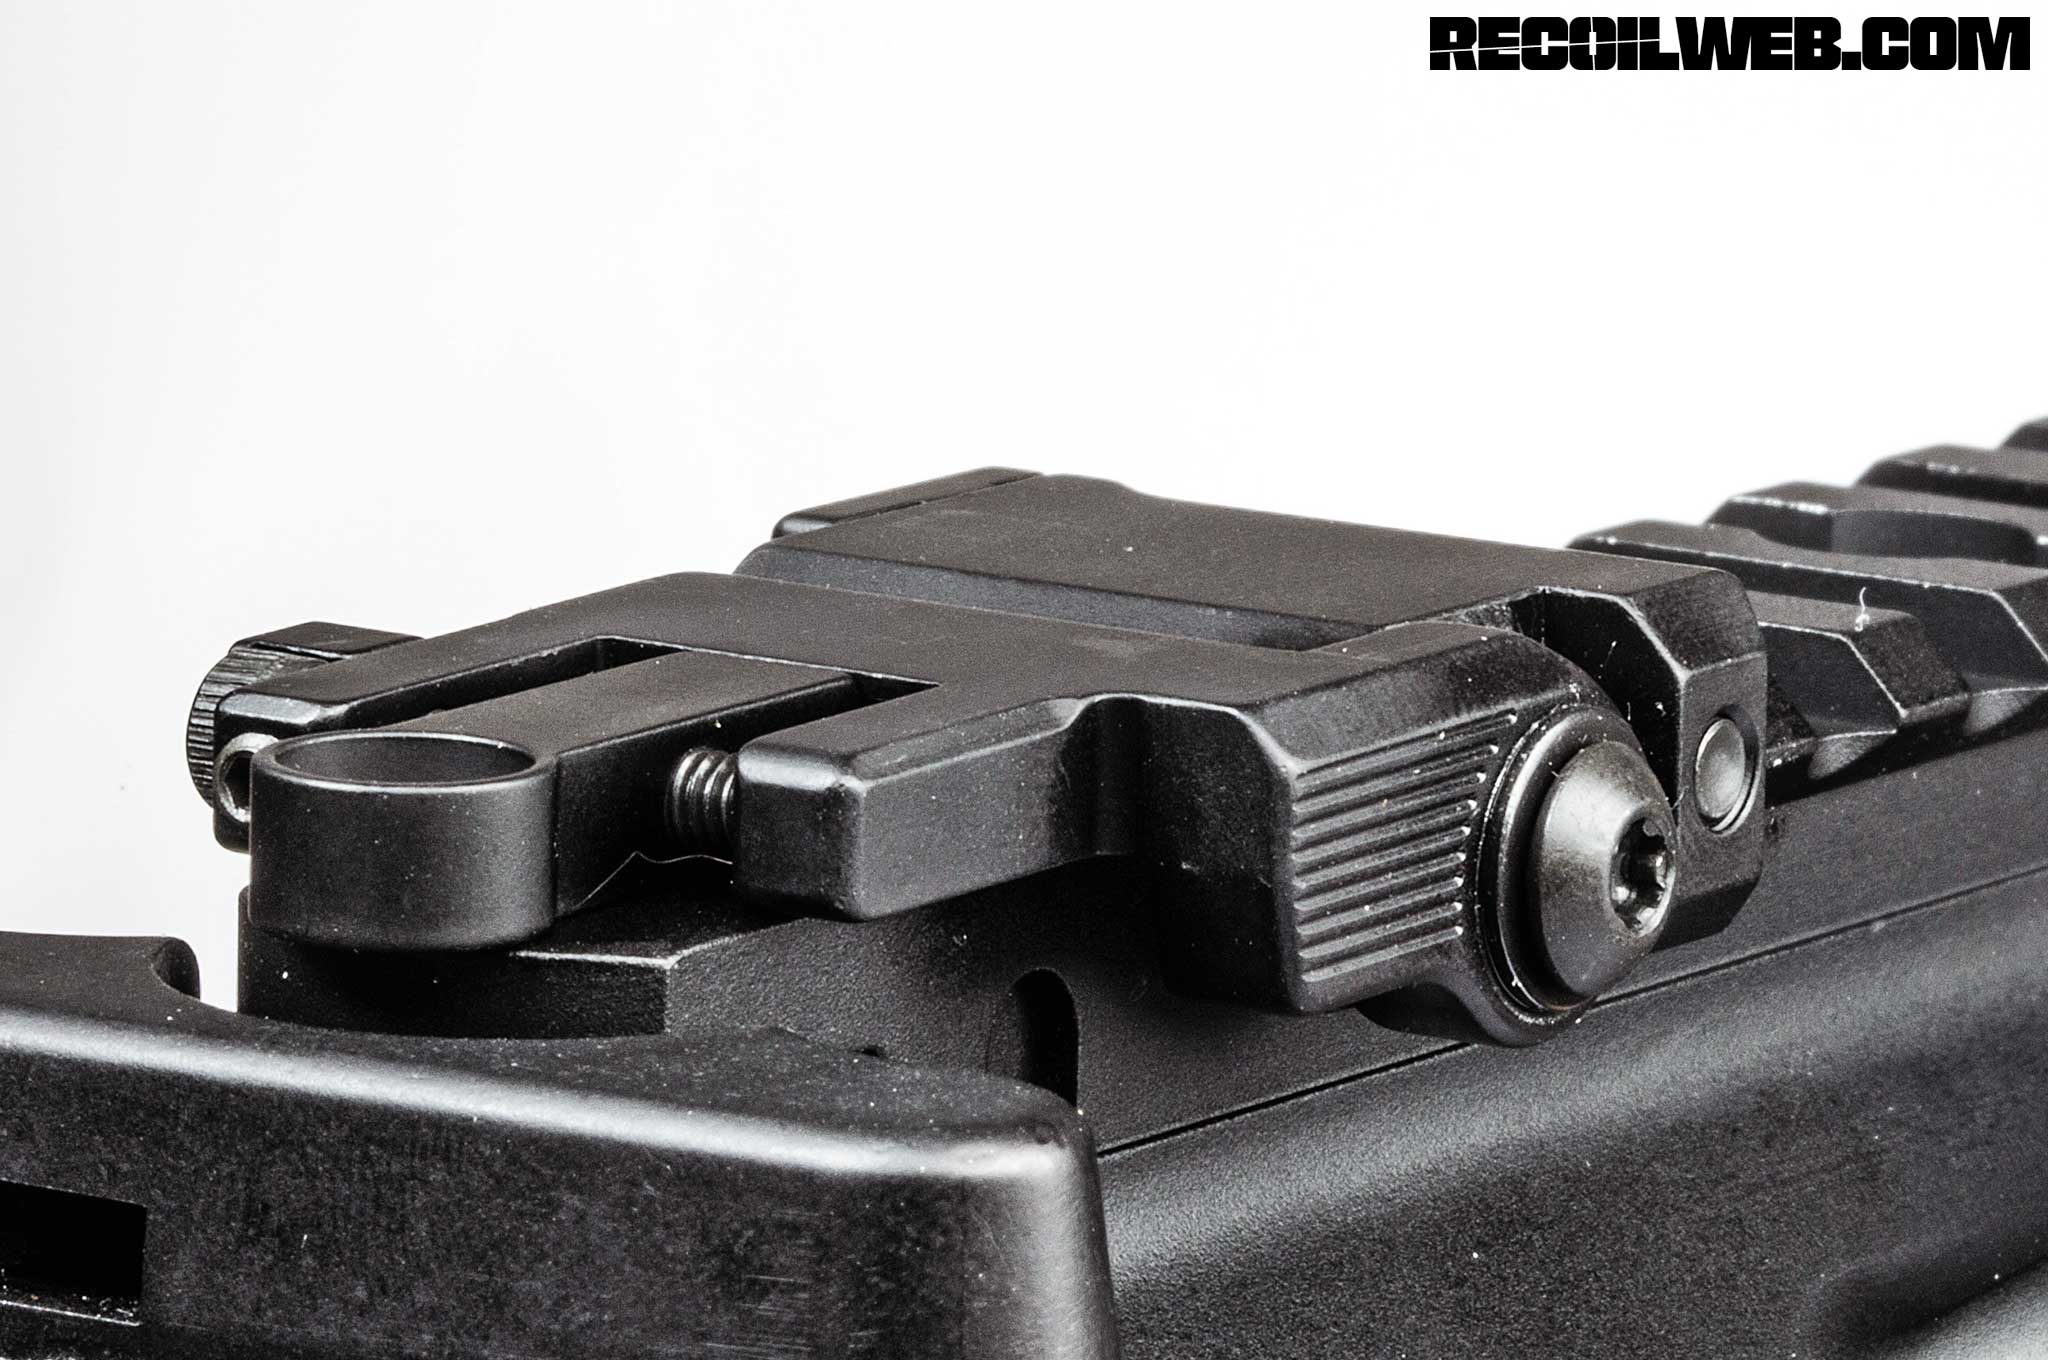 back-up-iron-sights-buyers-guide-bobro-engineering-lowrider-buis-003.